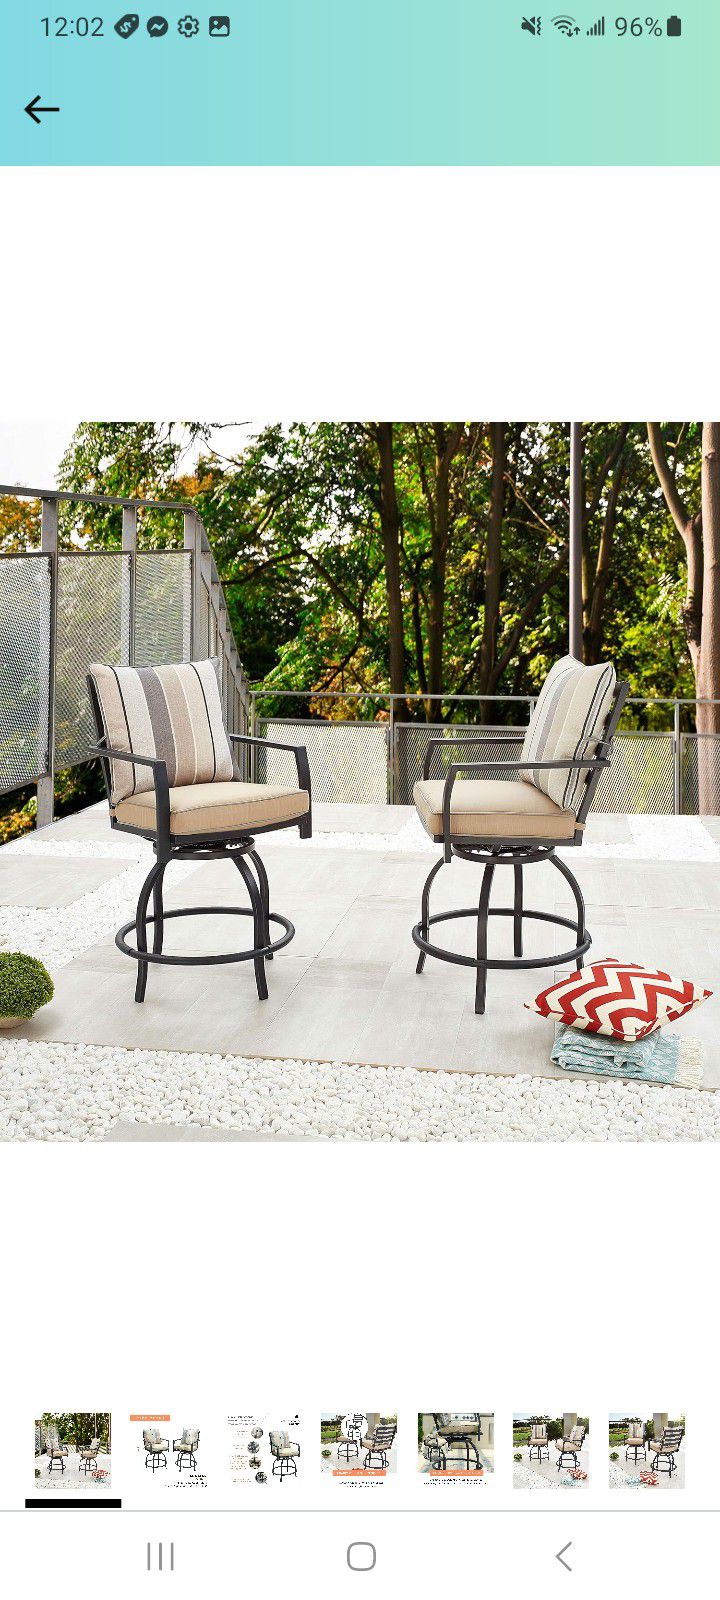 LOKATSE HOME Patio Bar Height Chairs, Outdoor Swivel Bar Stools Chairs with Seat and Back Cushions, High Swivel Armrest Bar Chair Set of 2

